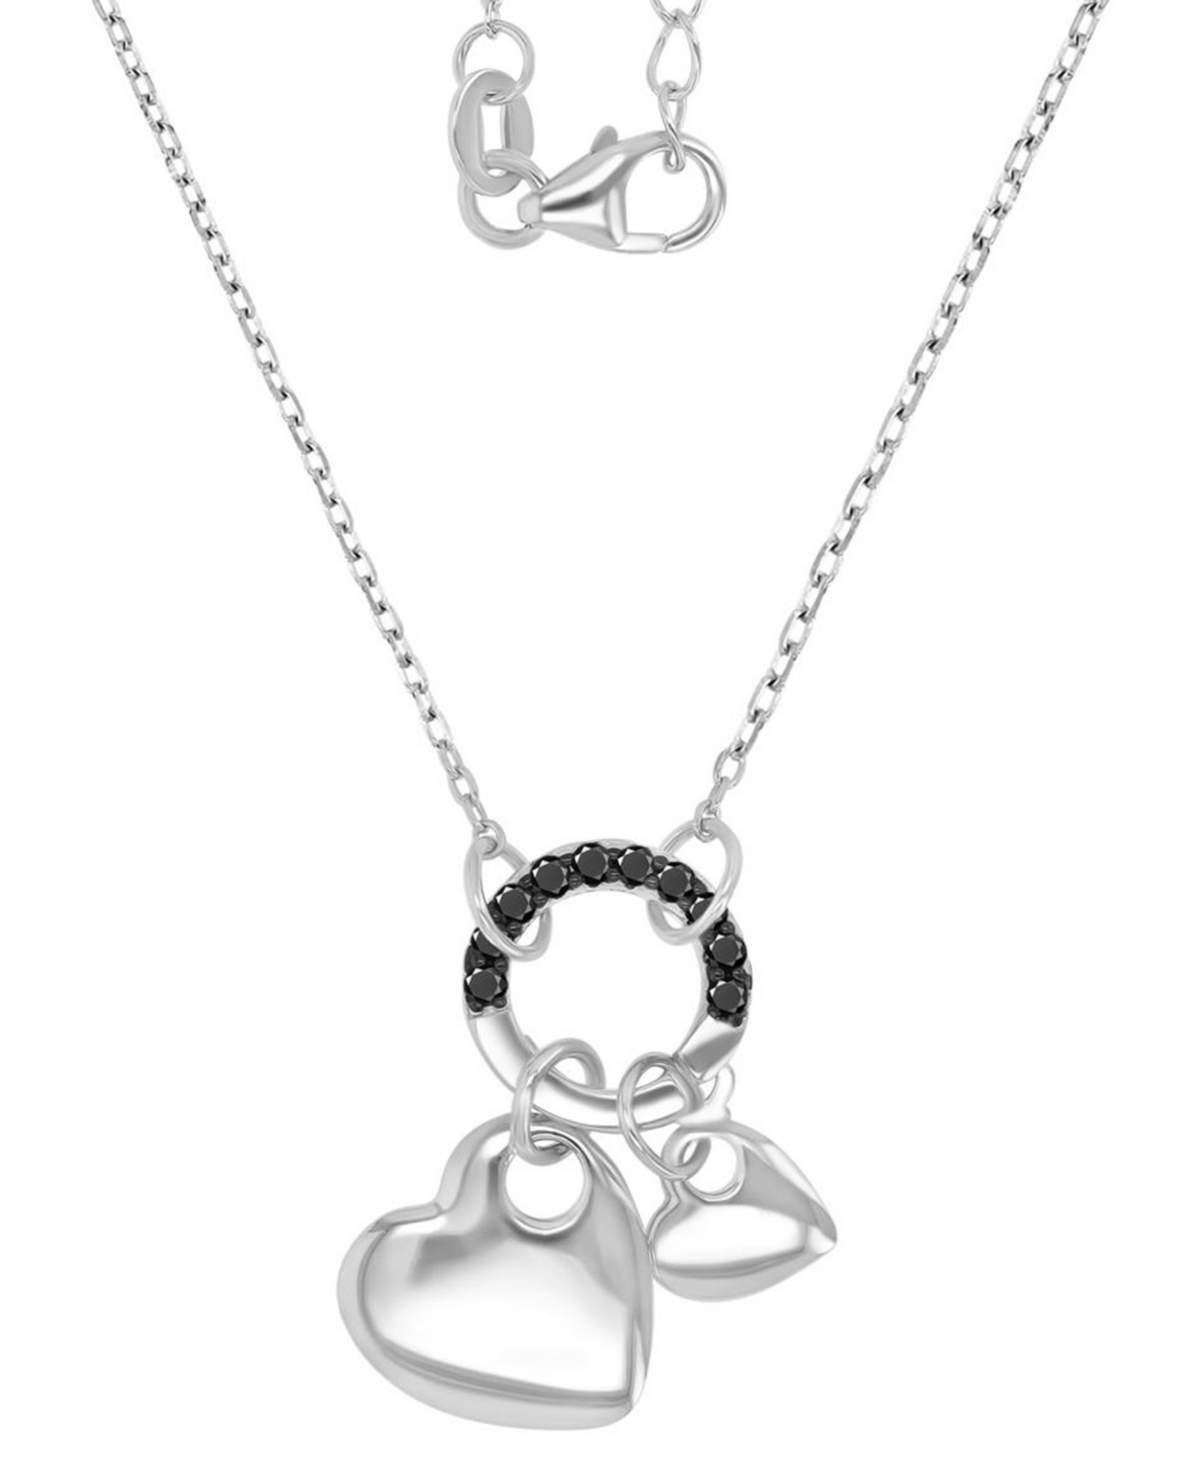 Black Spinel Double Heart & Ring Pendant Necklace (1/5 ct. t.w.) in Sterling Silver, 16" + 2" extender - Black Spinel